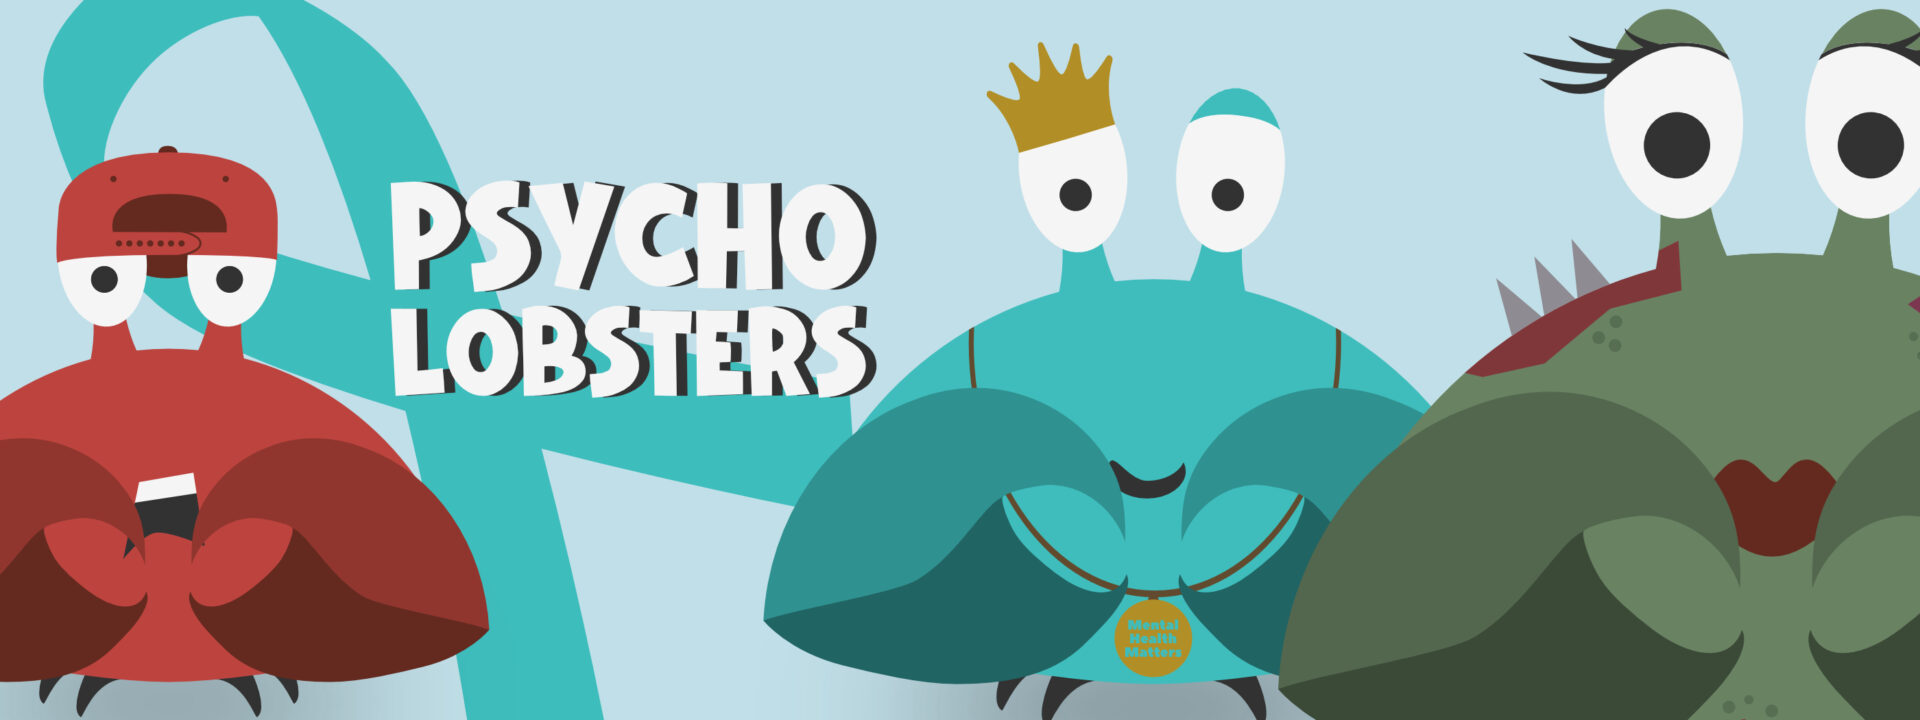 psycho lobsters banner